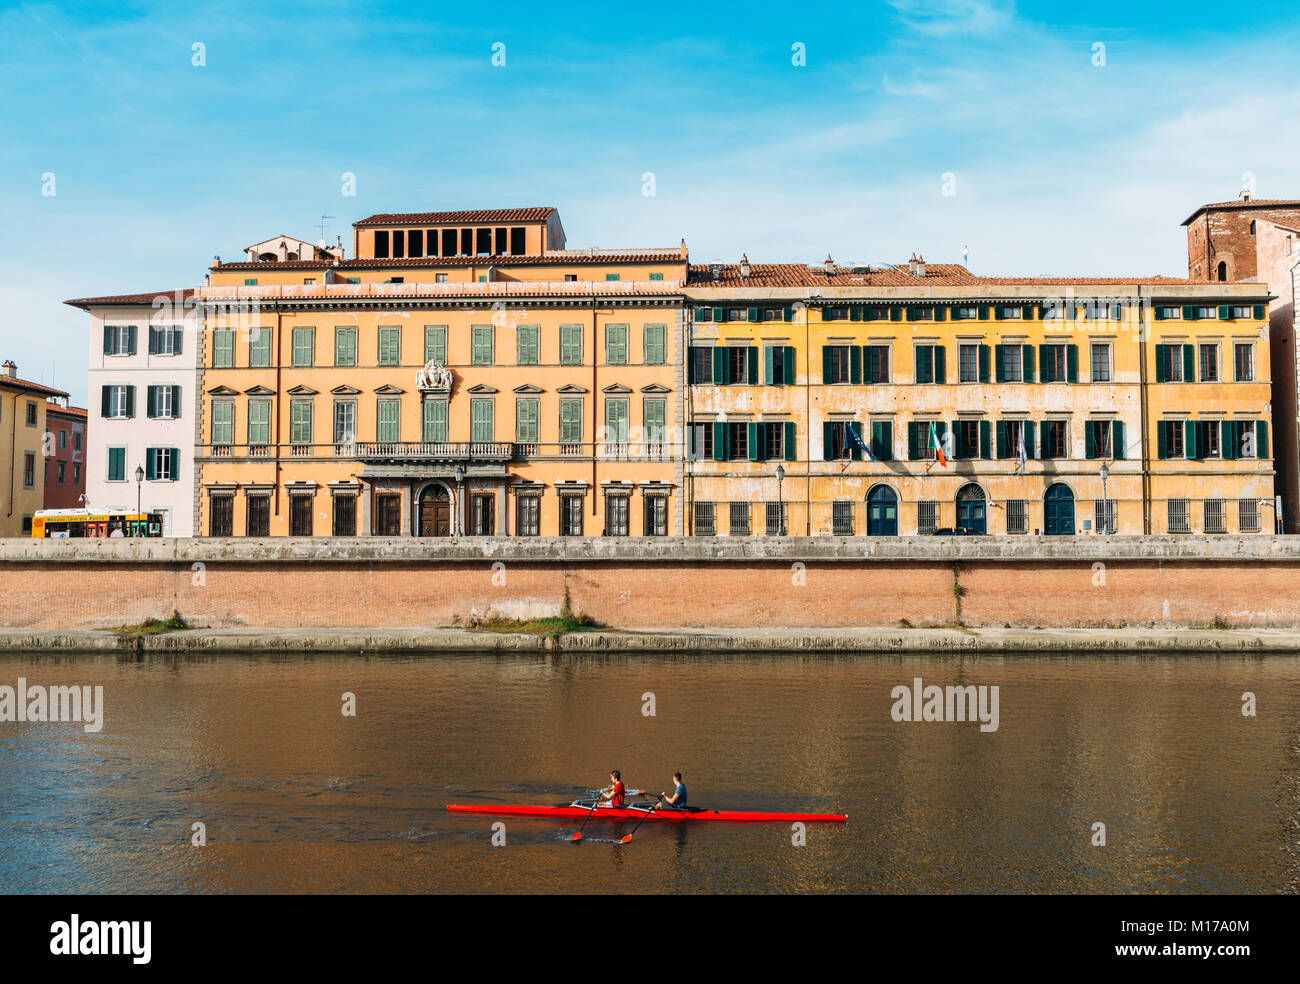 Rowers on River Arno in Pisa, Tuscany, Italy with stunning colourful Italian architecture in the background Stock Photo